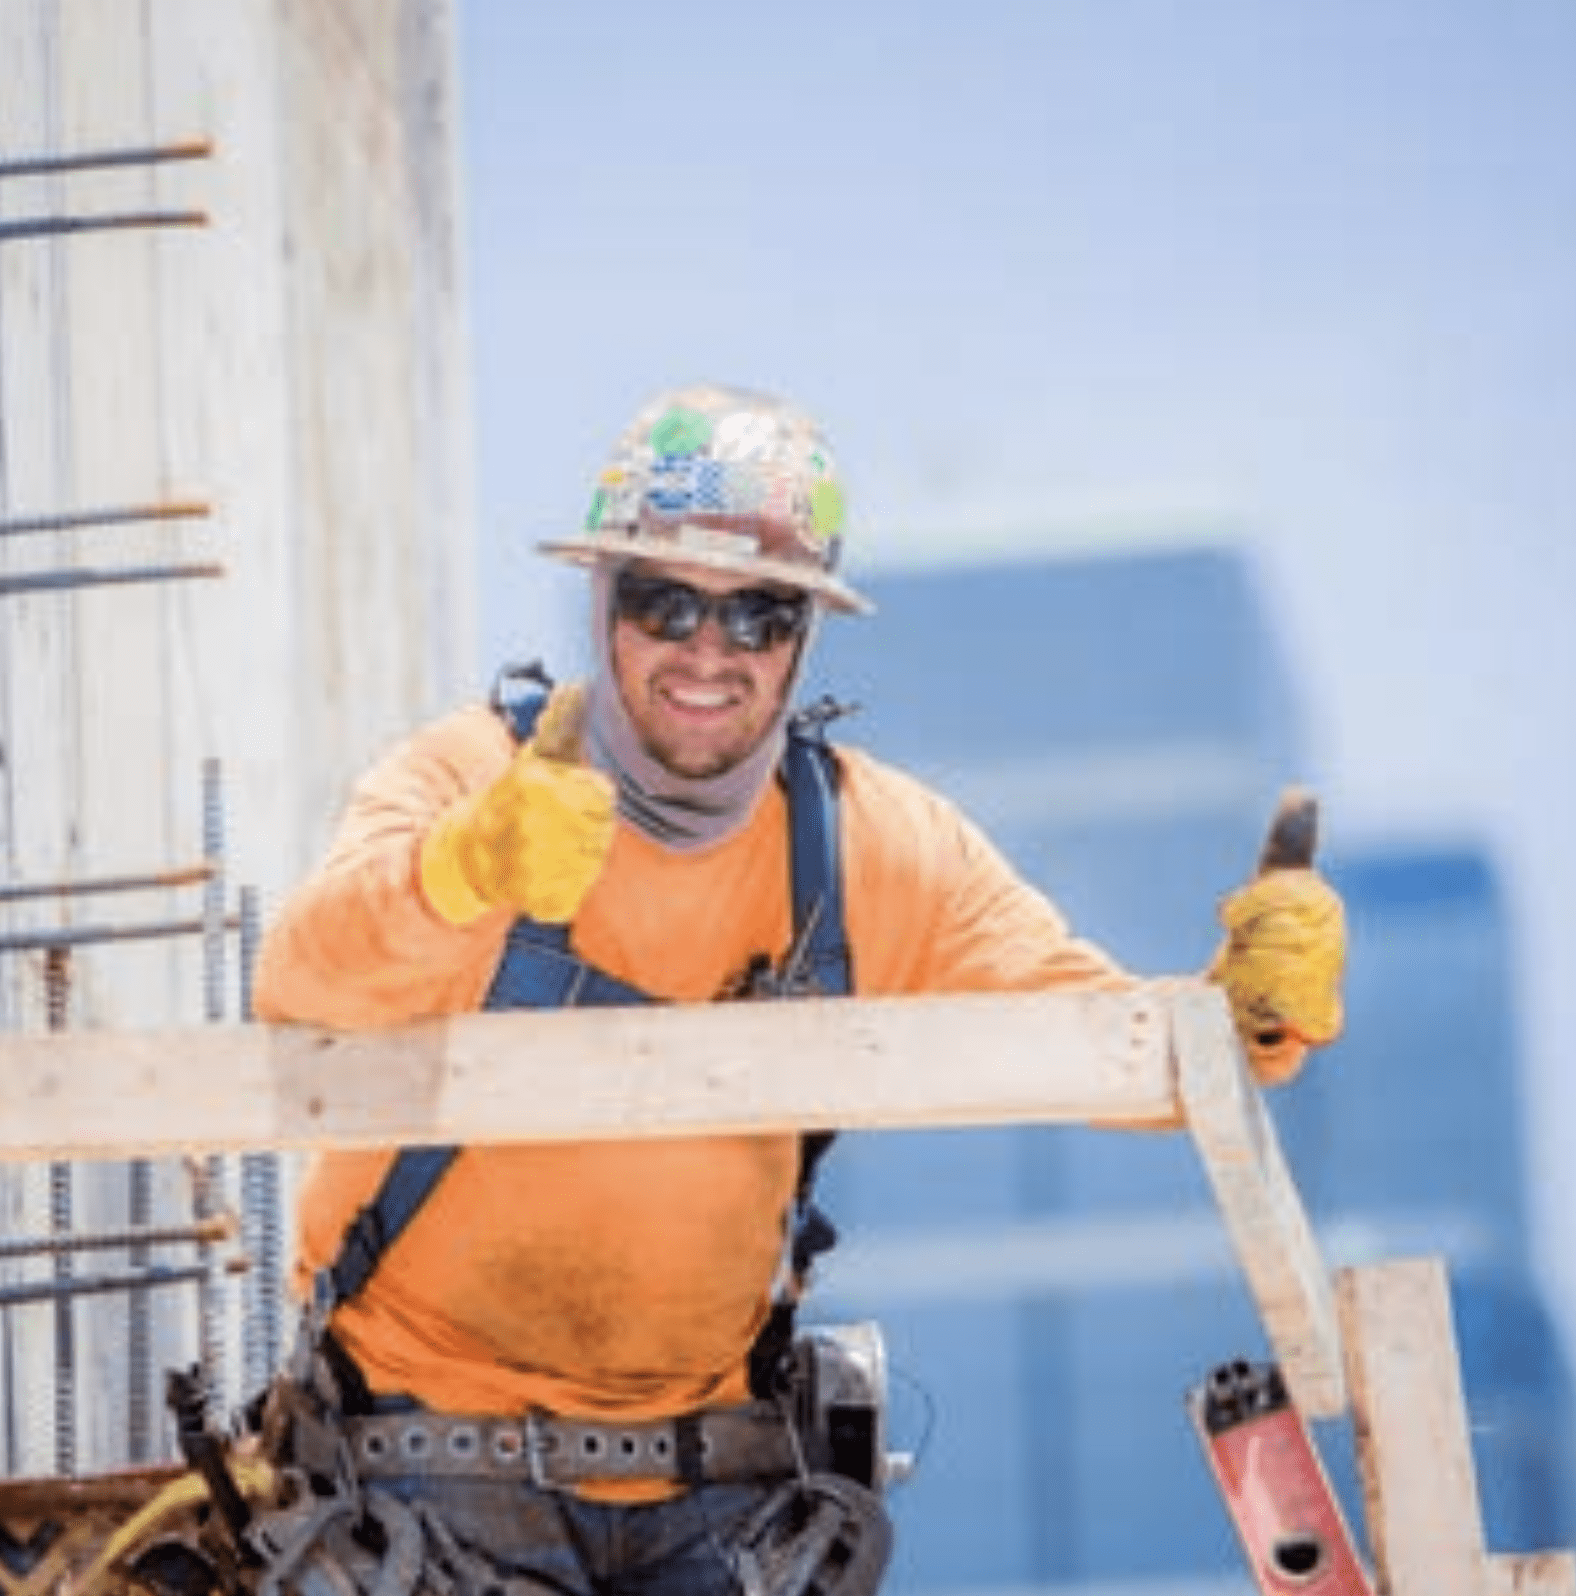 A construction worker giving a thumbs up.